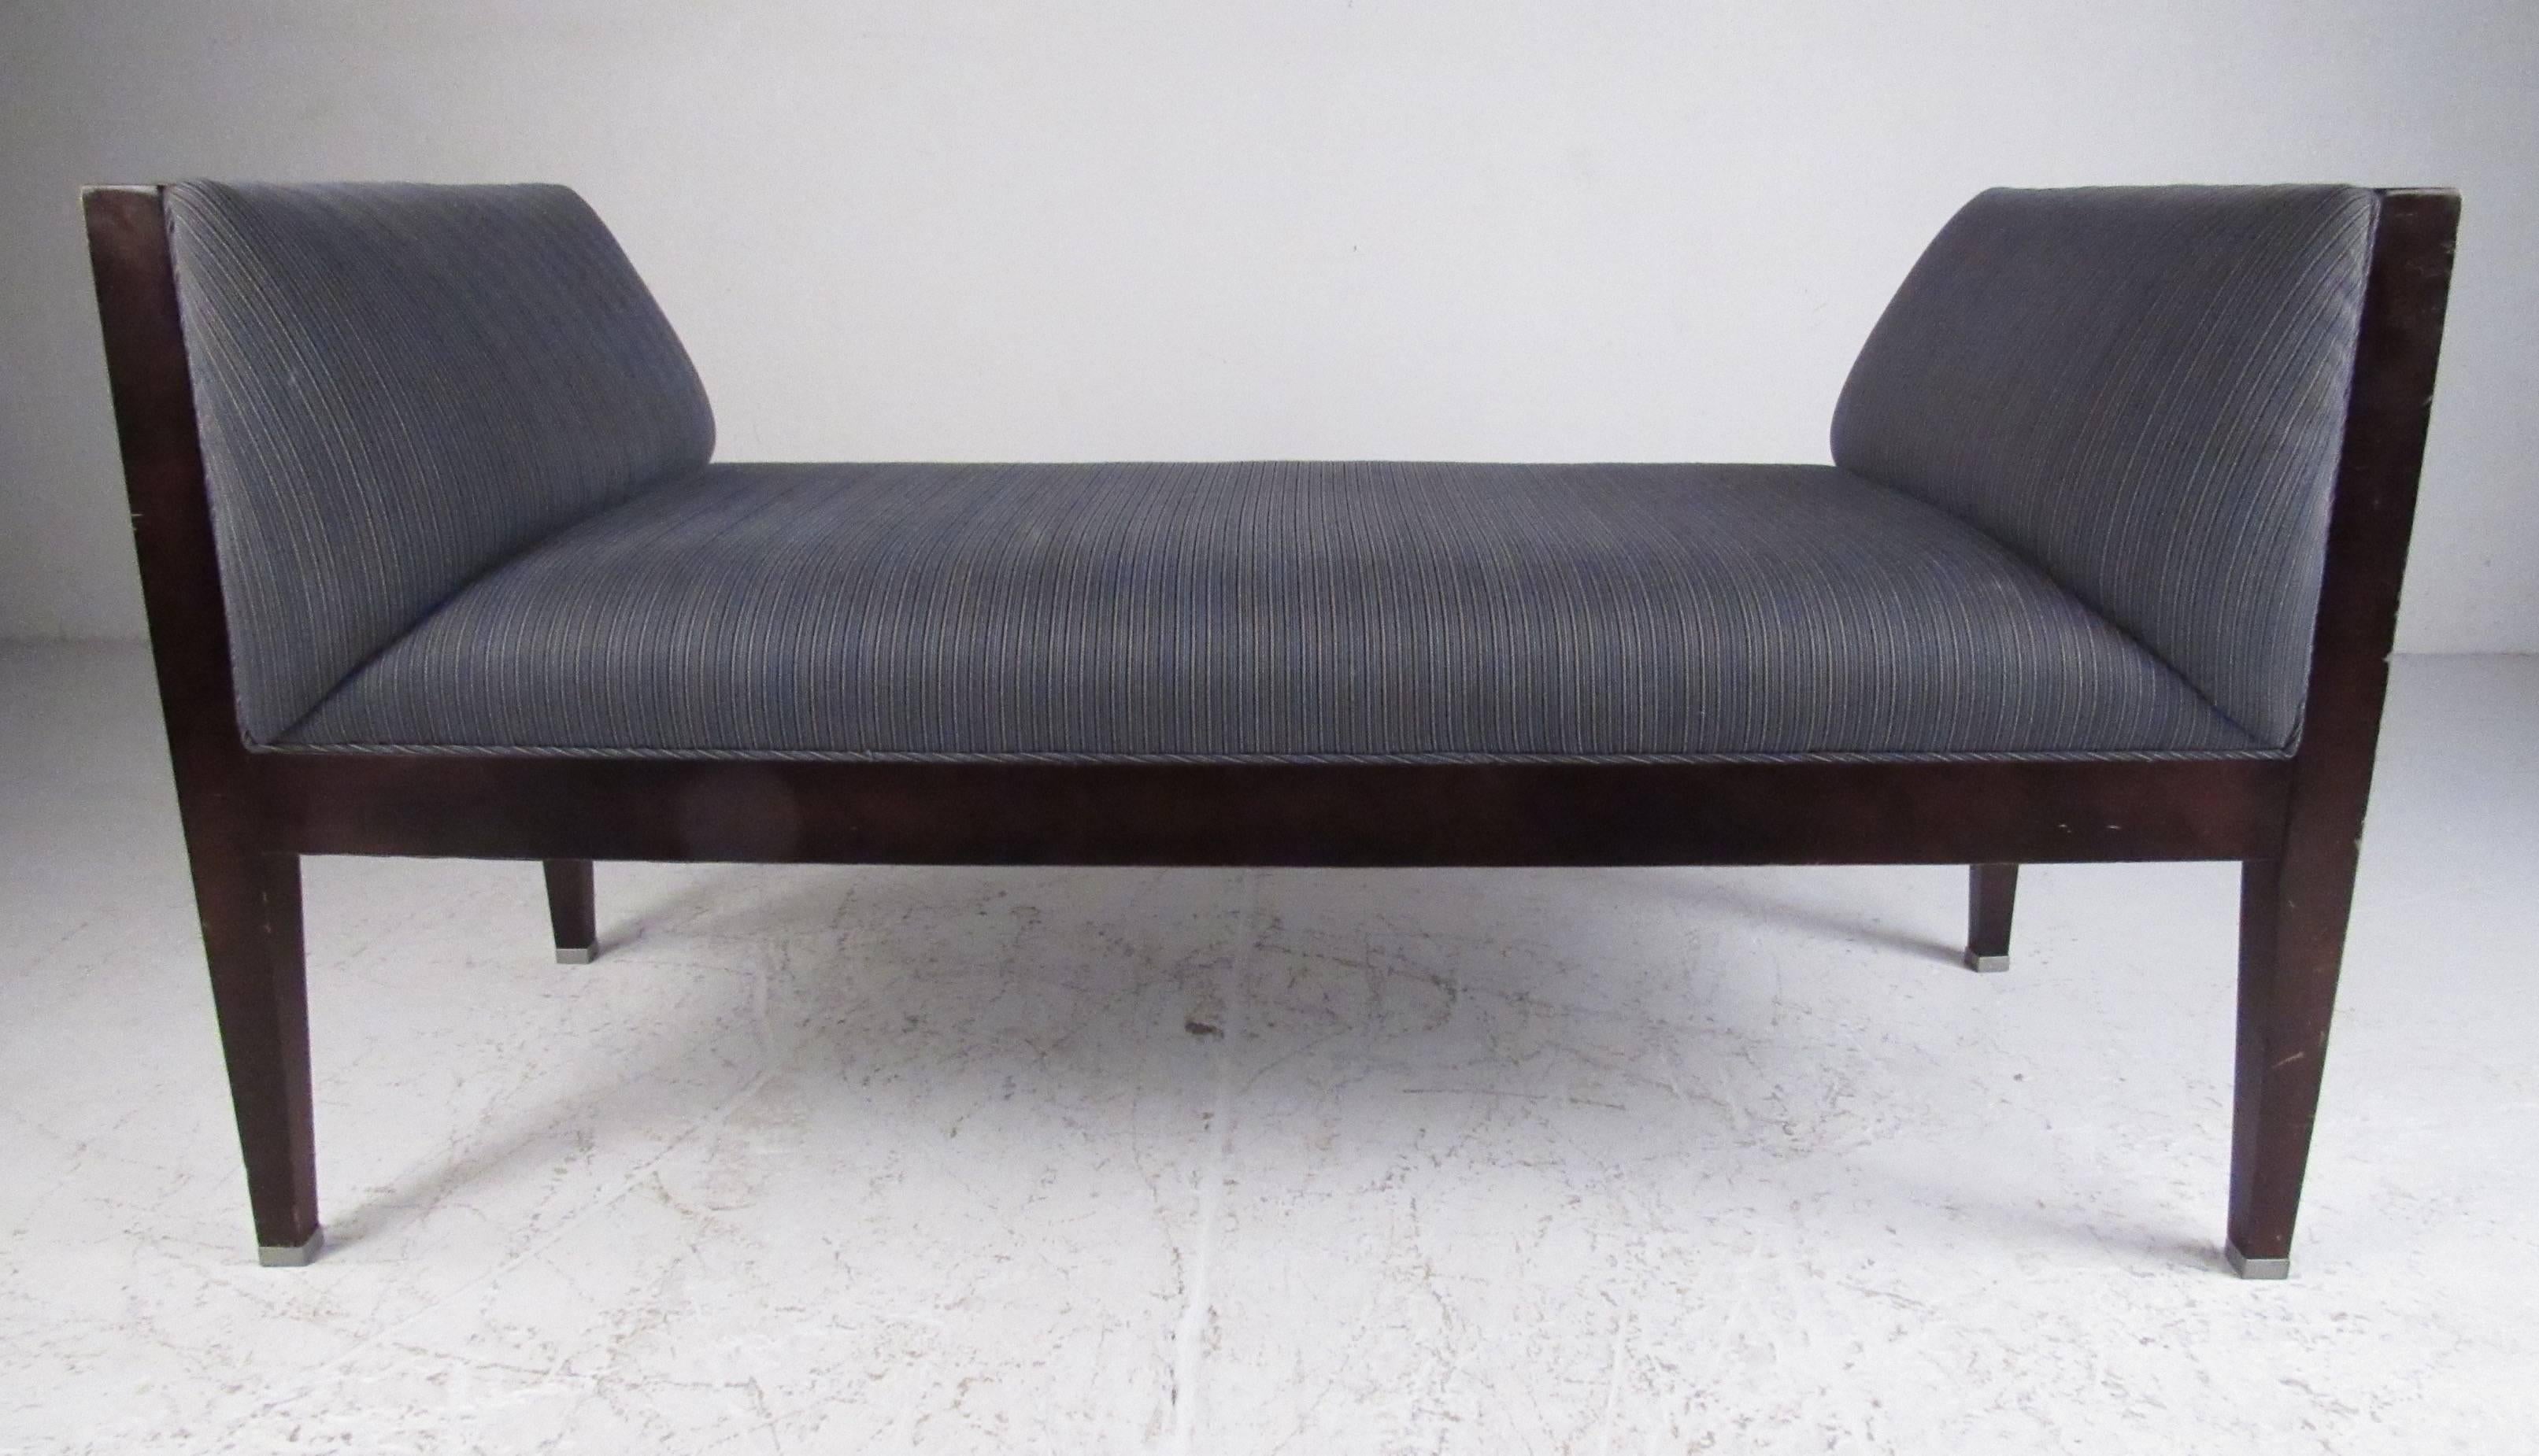 Milling Road 20th century bench with hardwood frame and upholstered seat and sides. Versatile design style that can easily compliment either home or office environment. Please confirm item location (NY or NJ) with dealer.